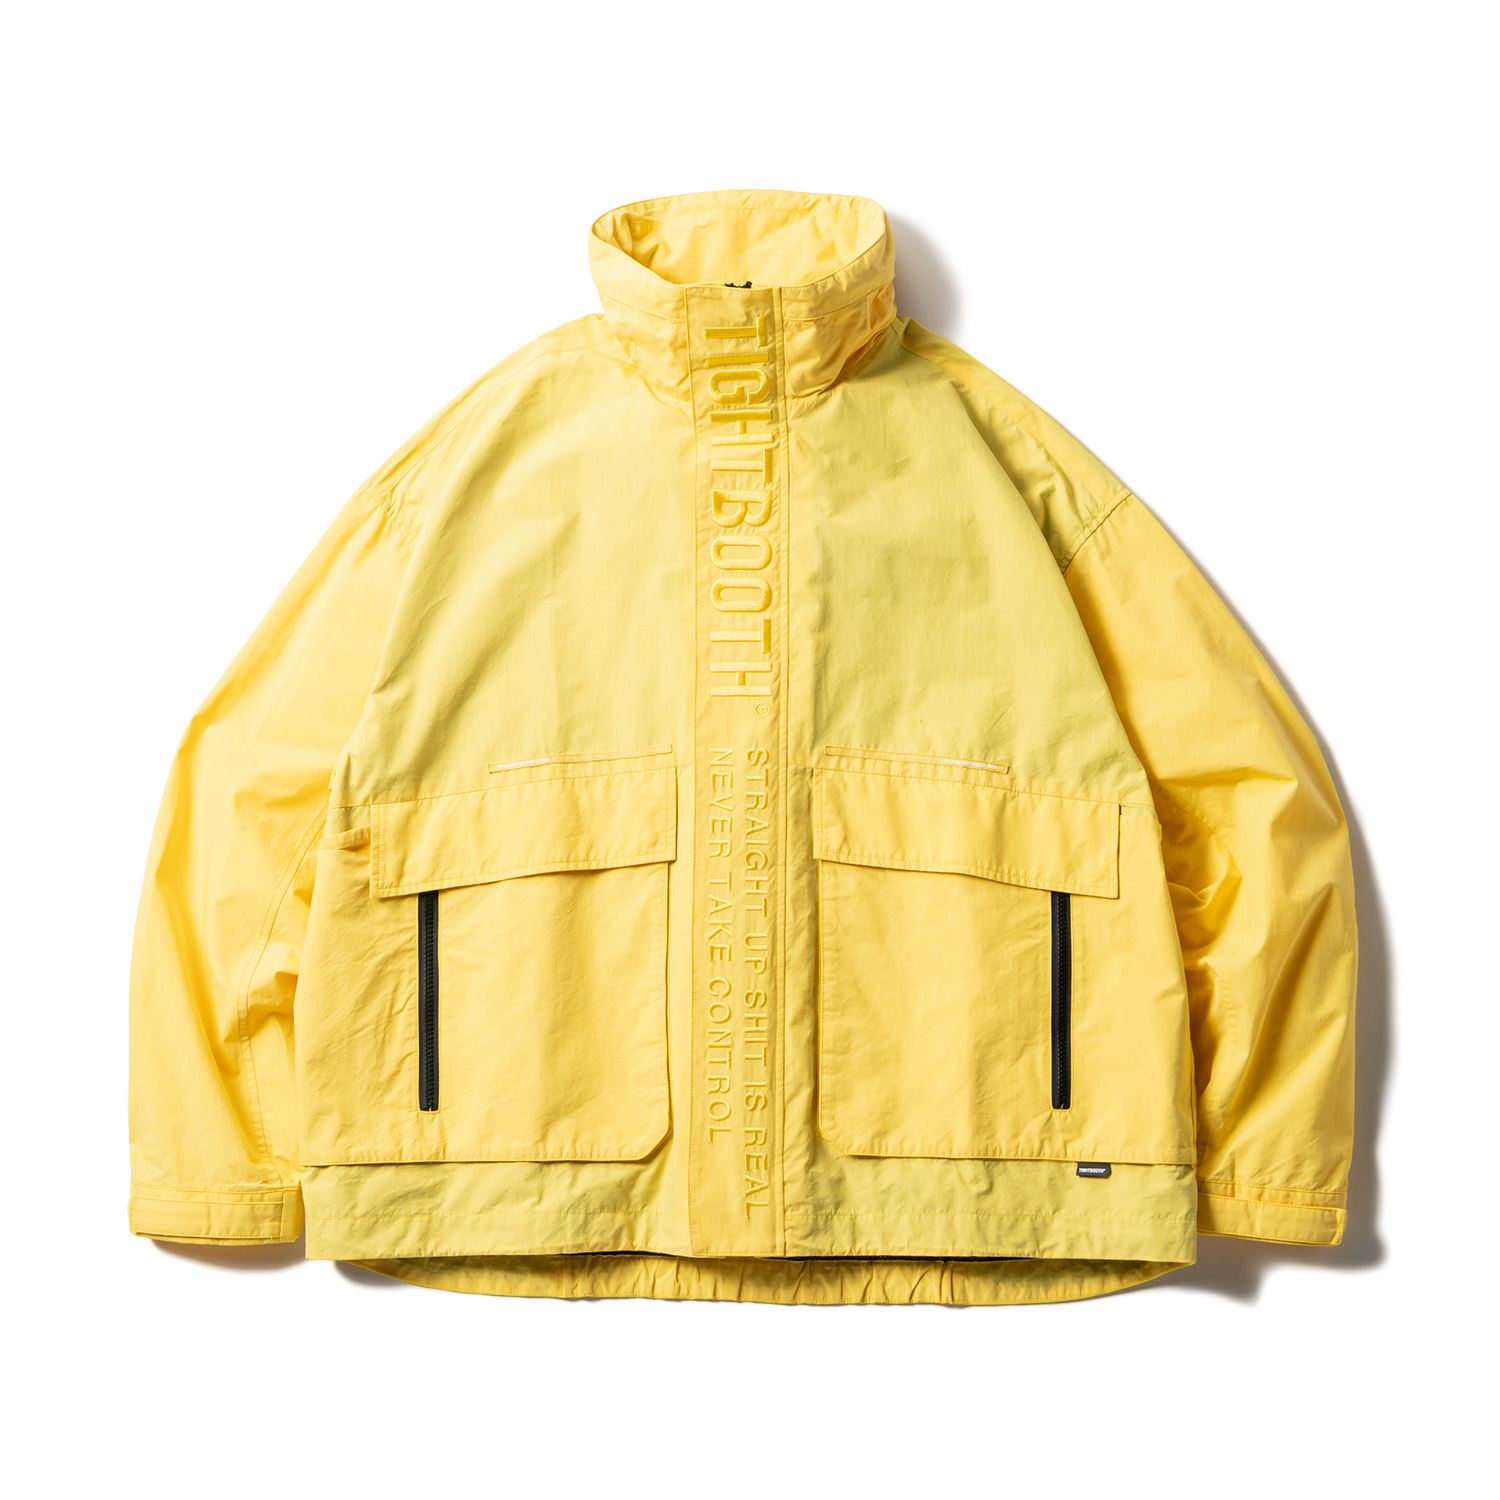 TIGHTBOOTH/RIPSTOP TACTICAL JACKET（Yellow）［リップストップ